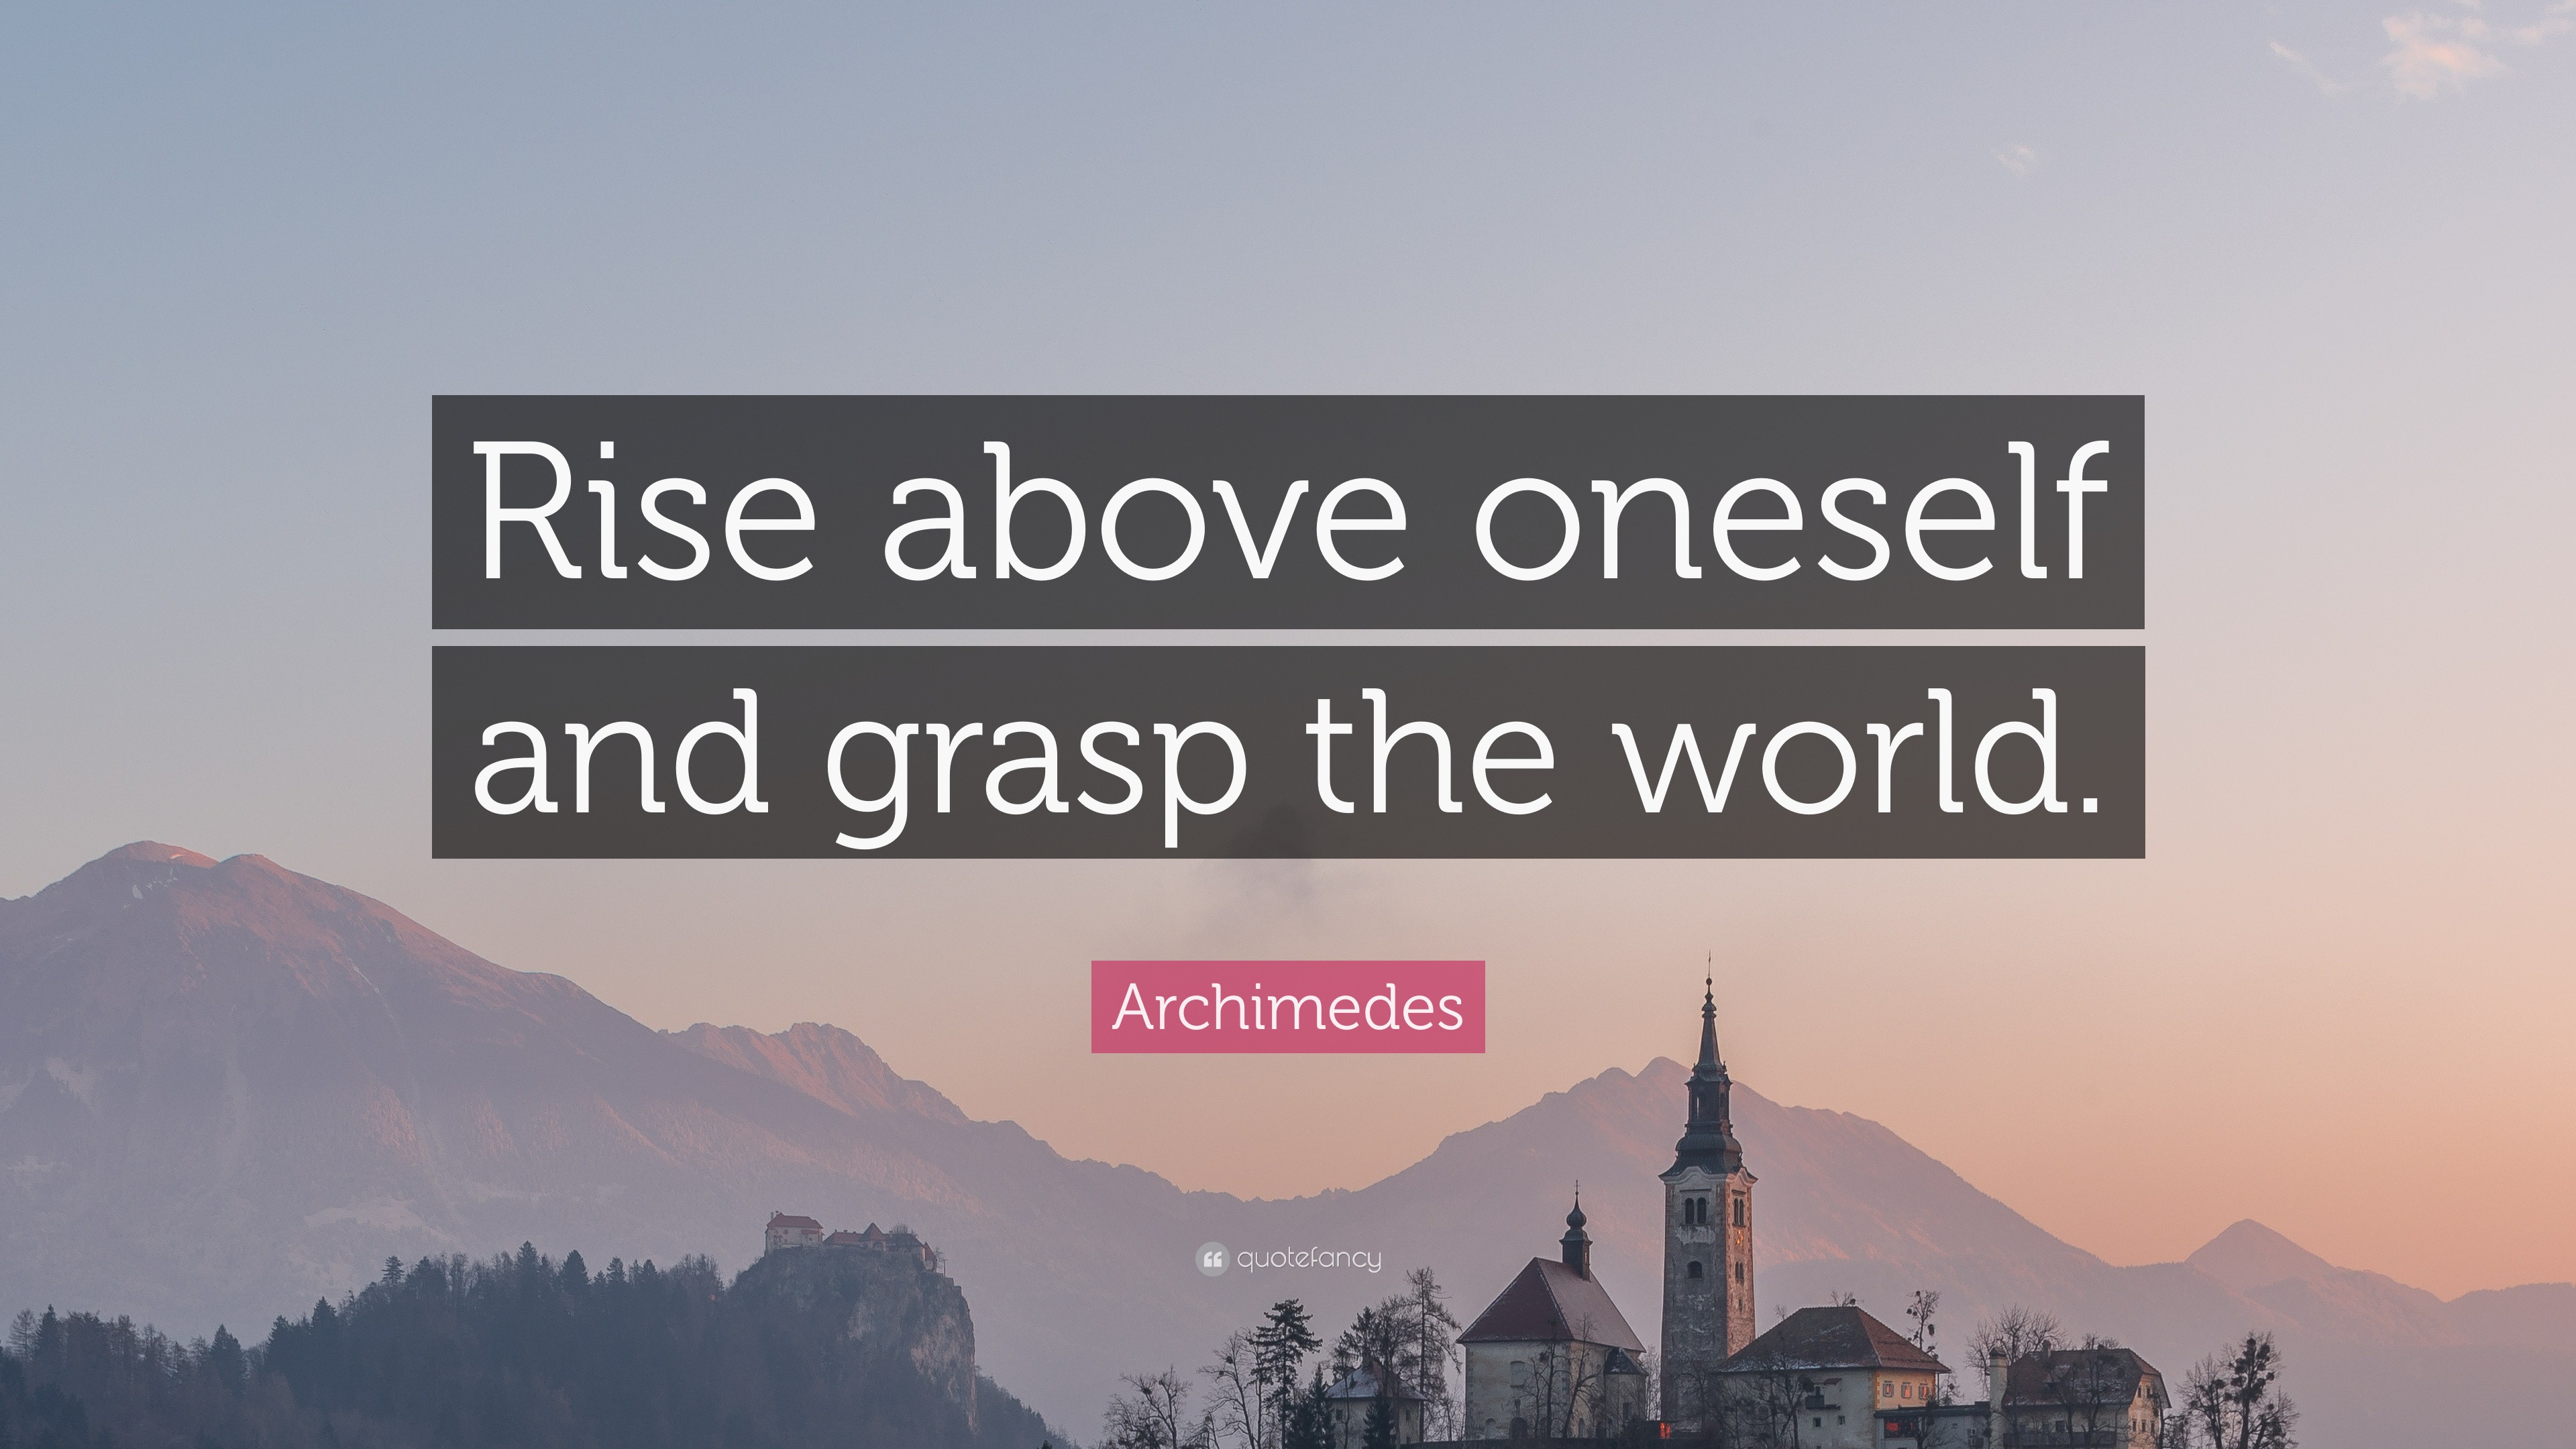 archimedes quotes